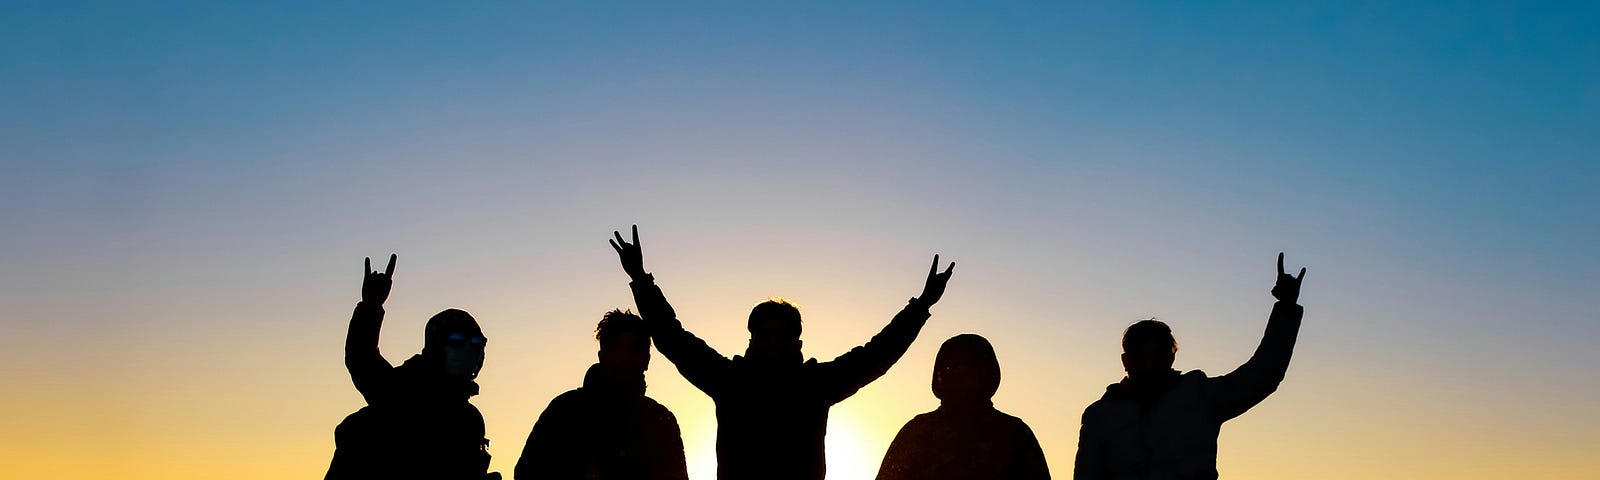 Silhouette of a team of five signaling success in victory.